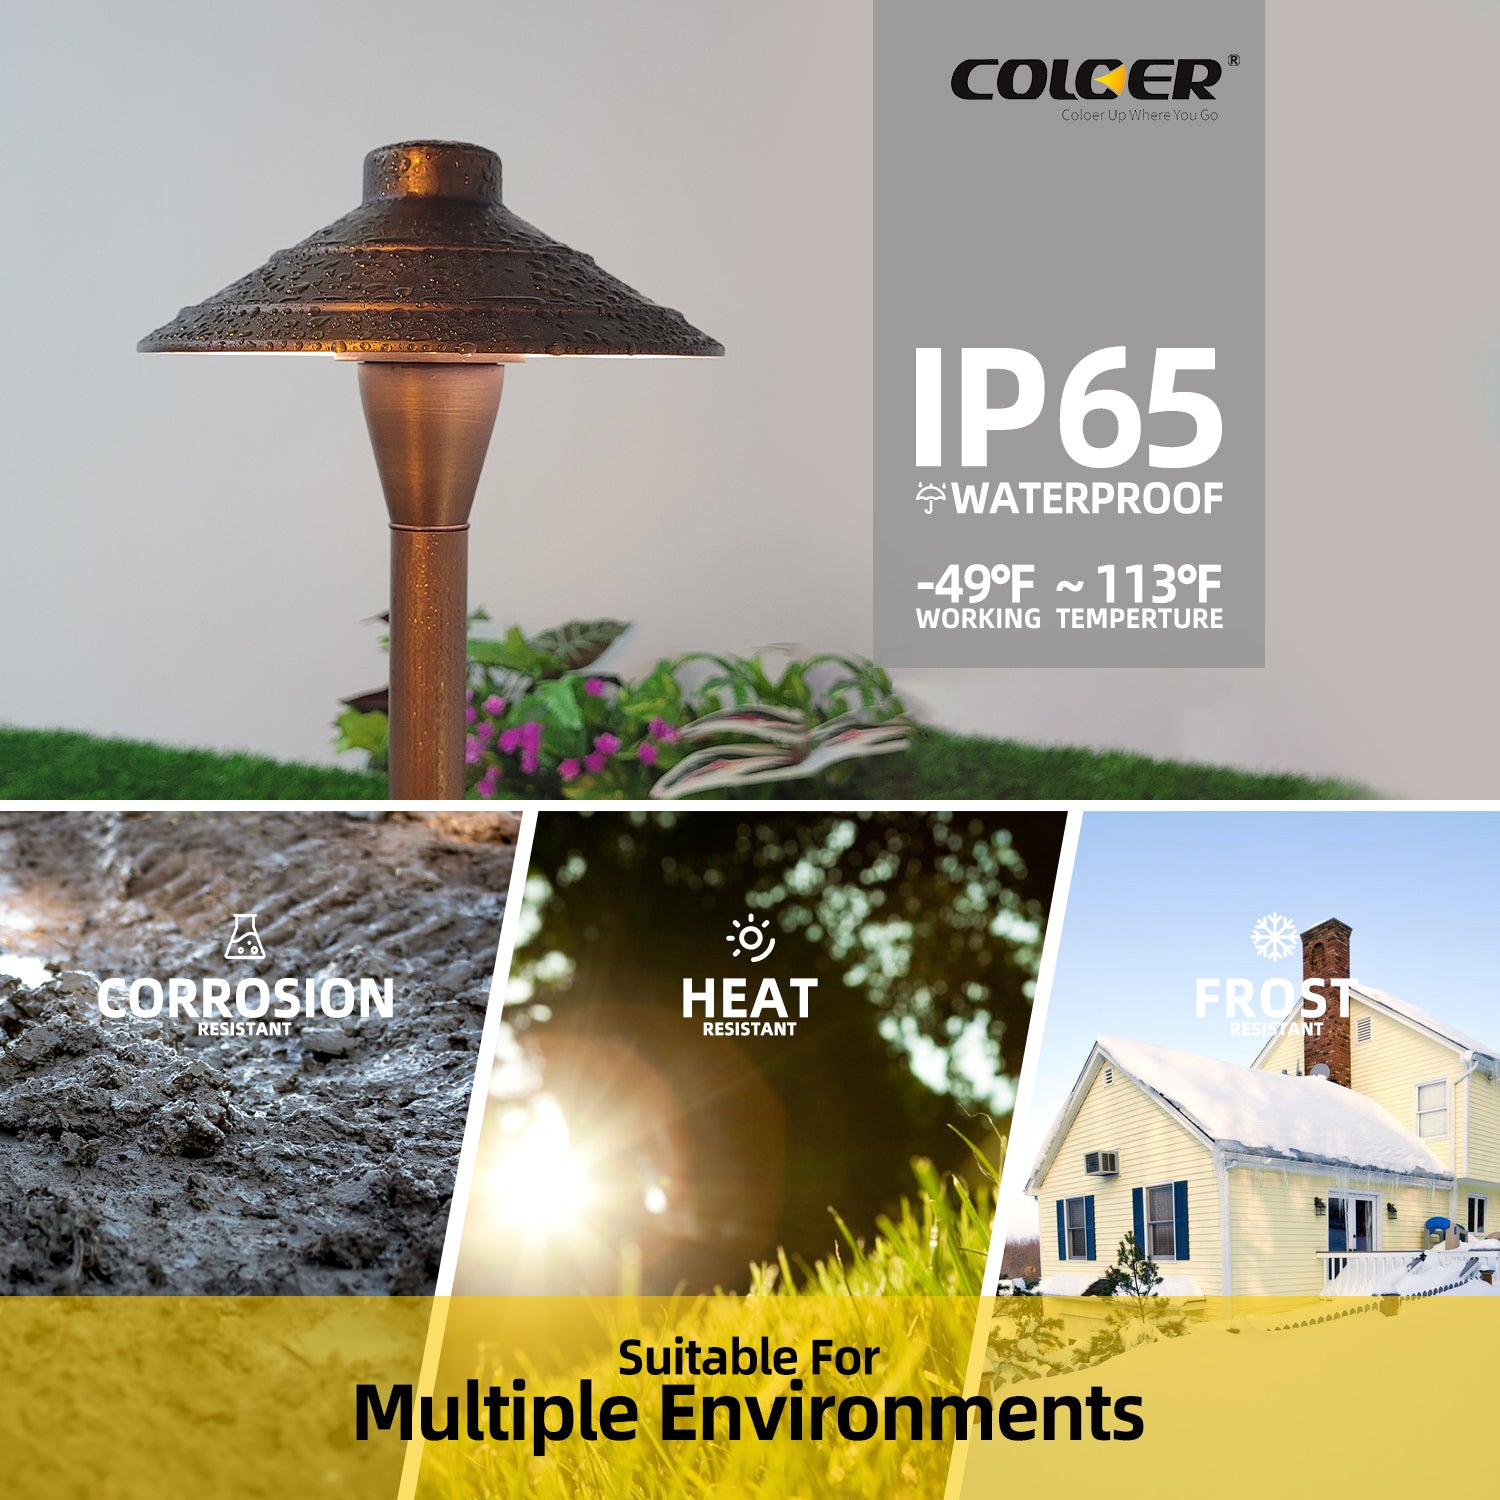 COLOER brass outdoor garden pathway light showcasing IP65 waterproof rating, operational temperature from -49°F to 113°F, corrosion, heat, and frost resistance, suitable for various environments.